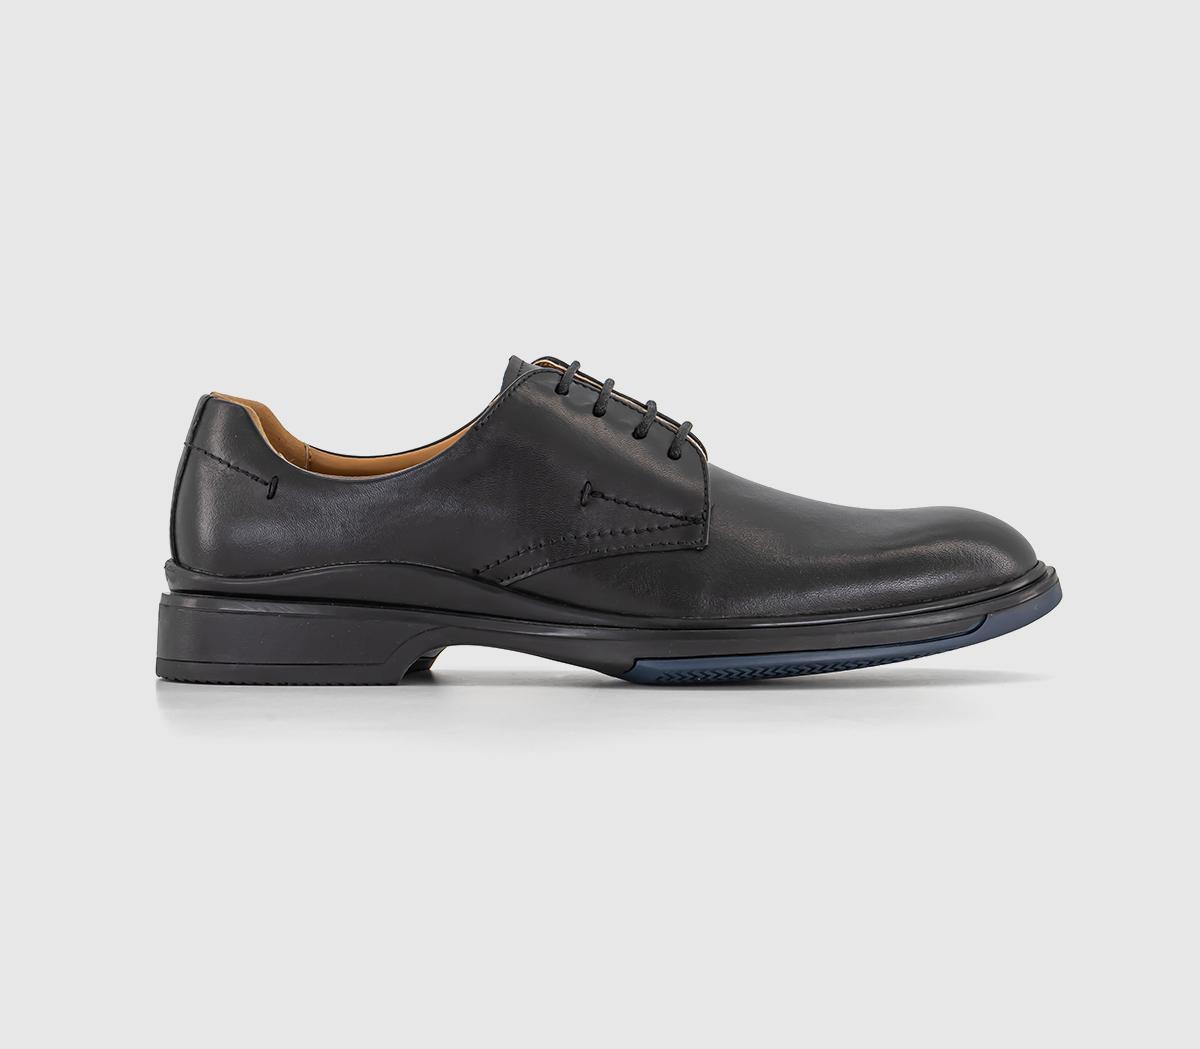 OFFICE Montebello Moulded Sole 4 Eye Derby Shoes Black Leather - Men’s ...